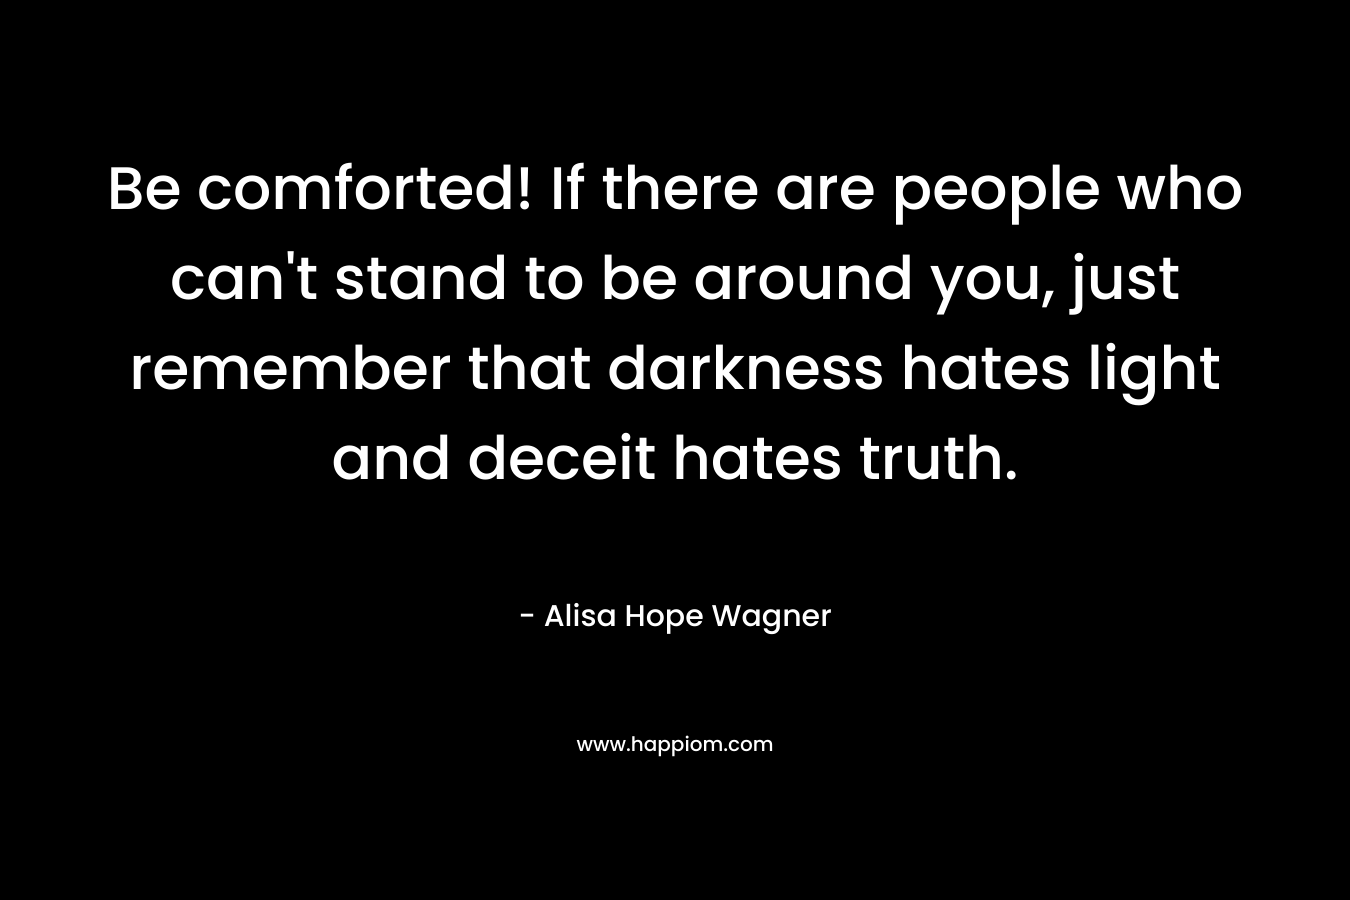 Be comforted! If there are people who can't stand to be around you, just remember that darkness hates light and deceit hates truth.